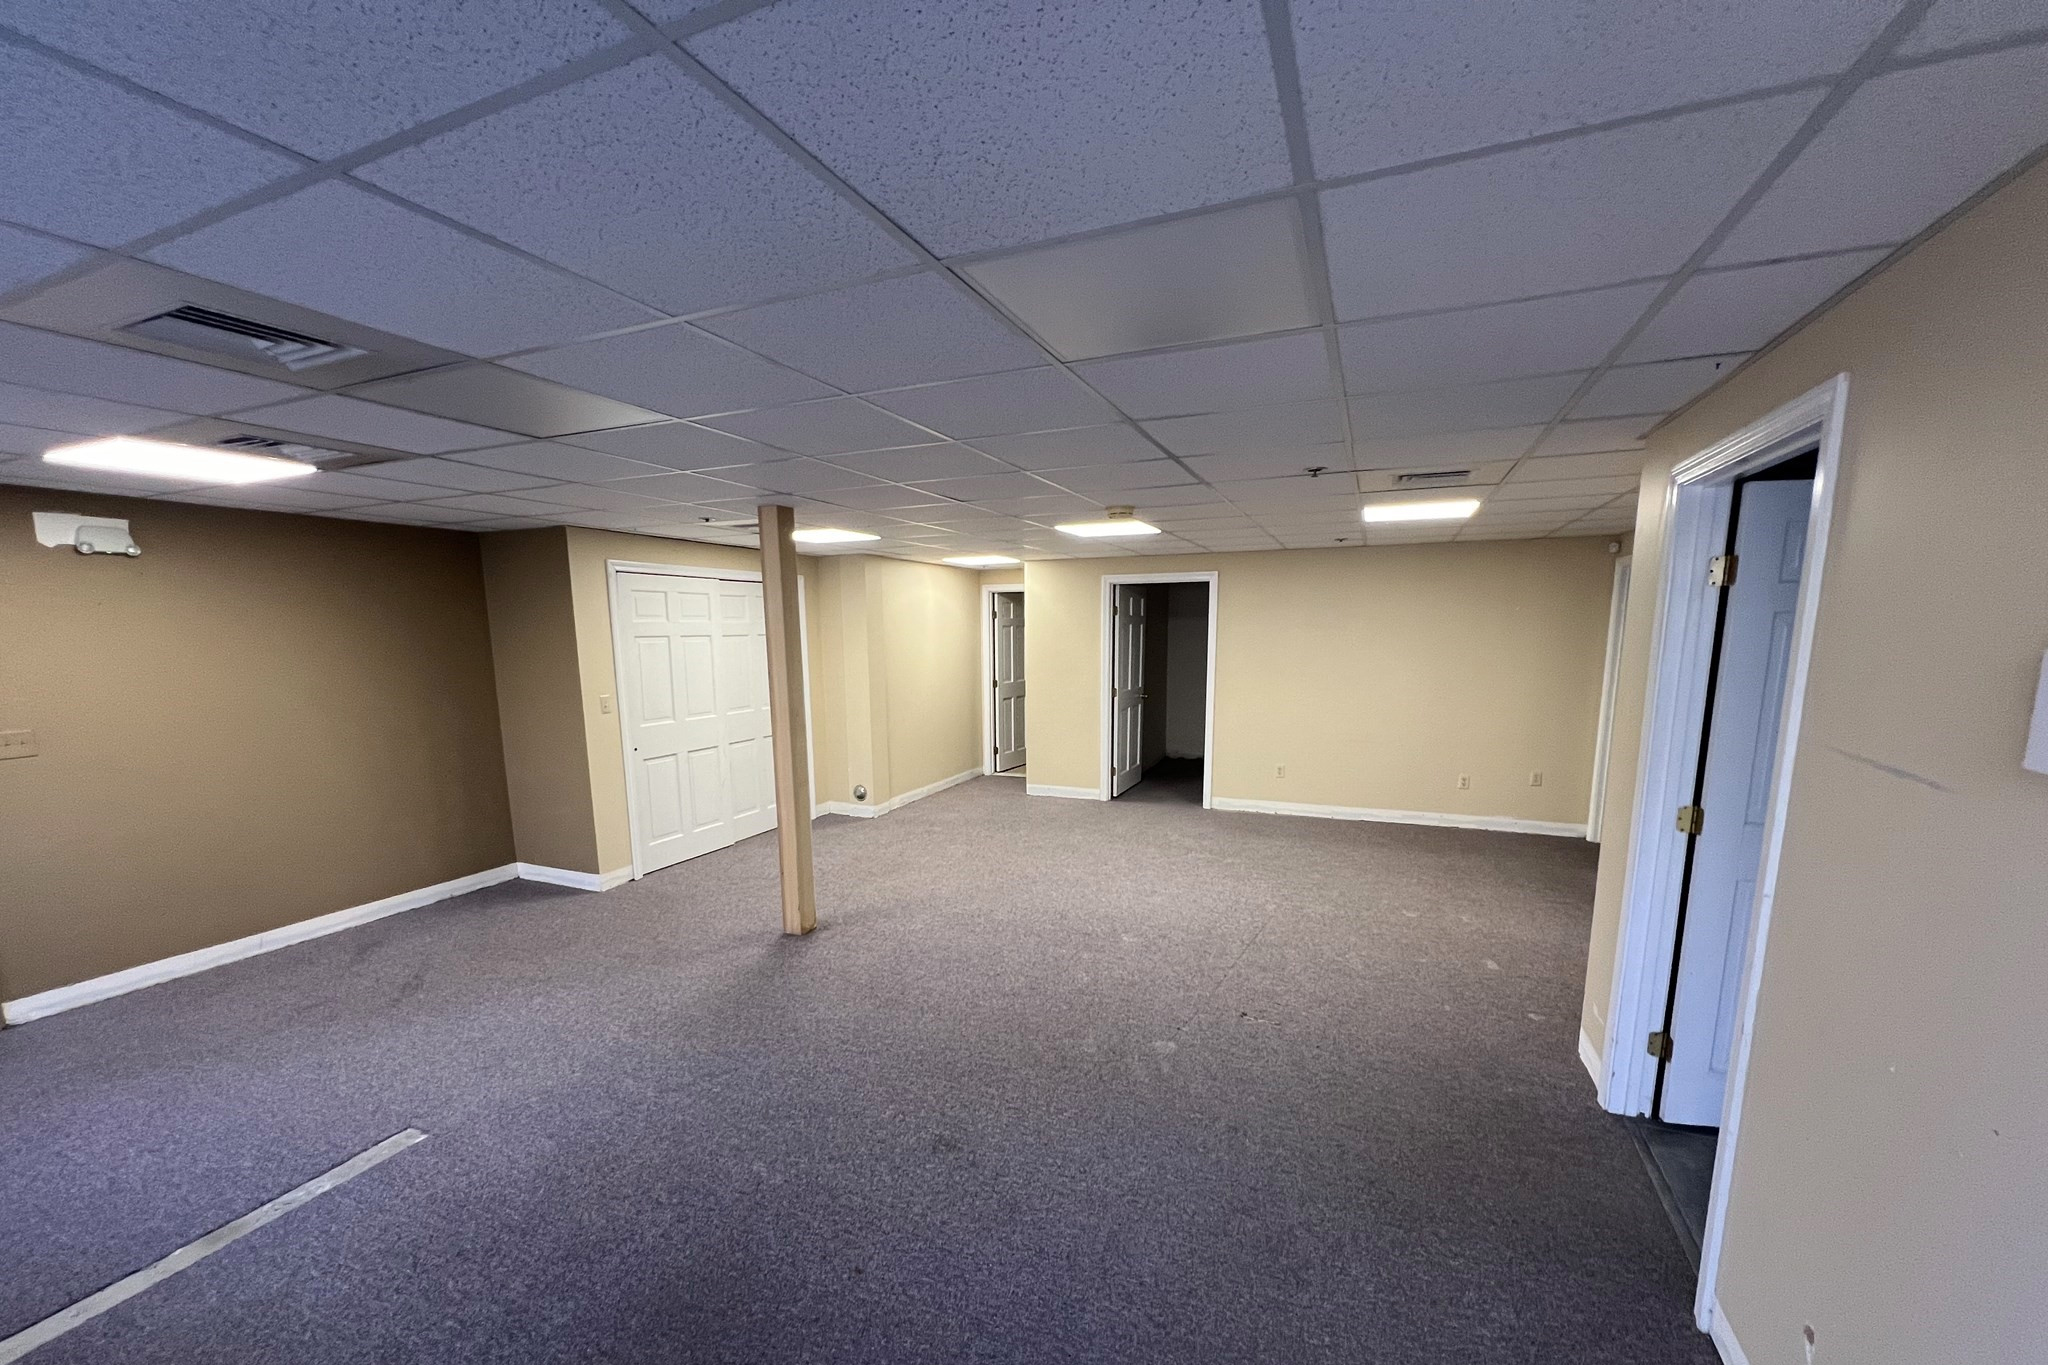 empty office space with tan walls, white trime and a carpeted floor